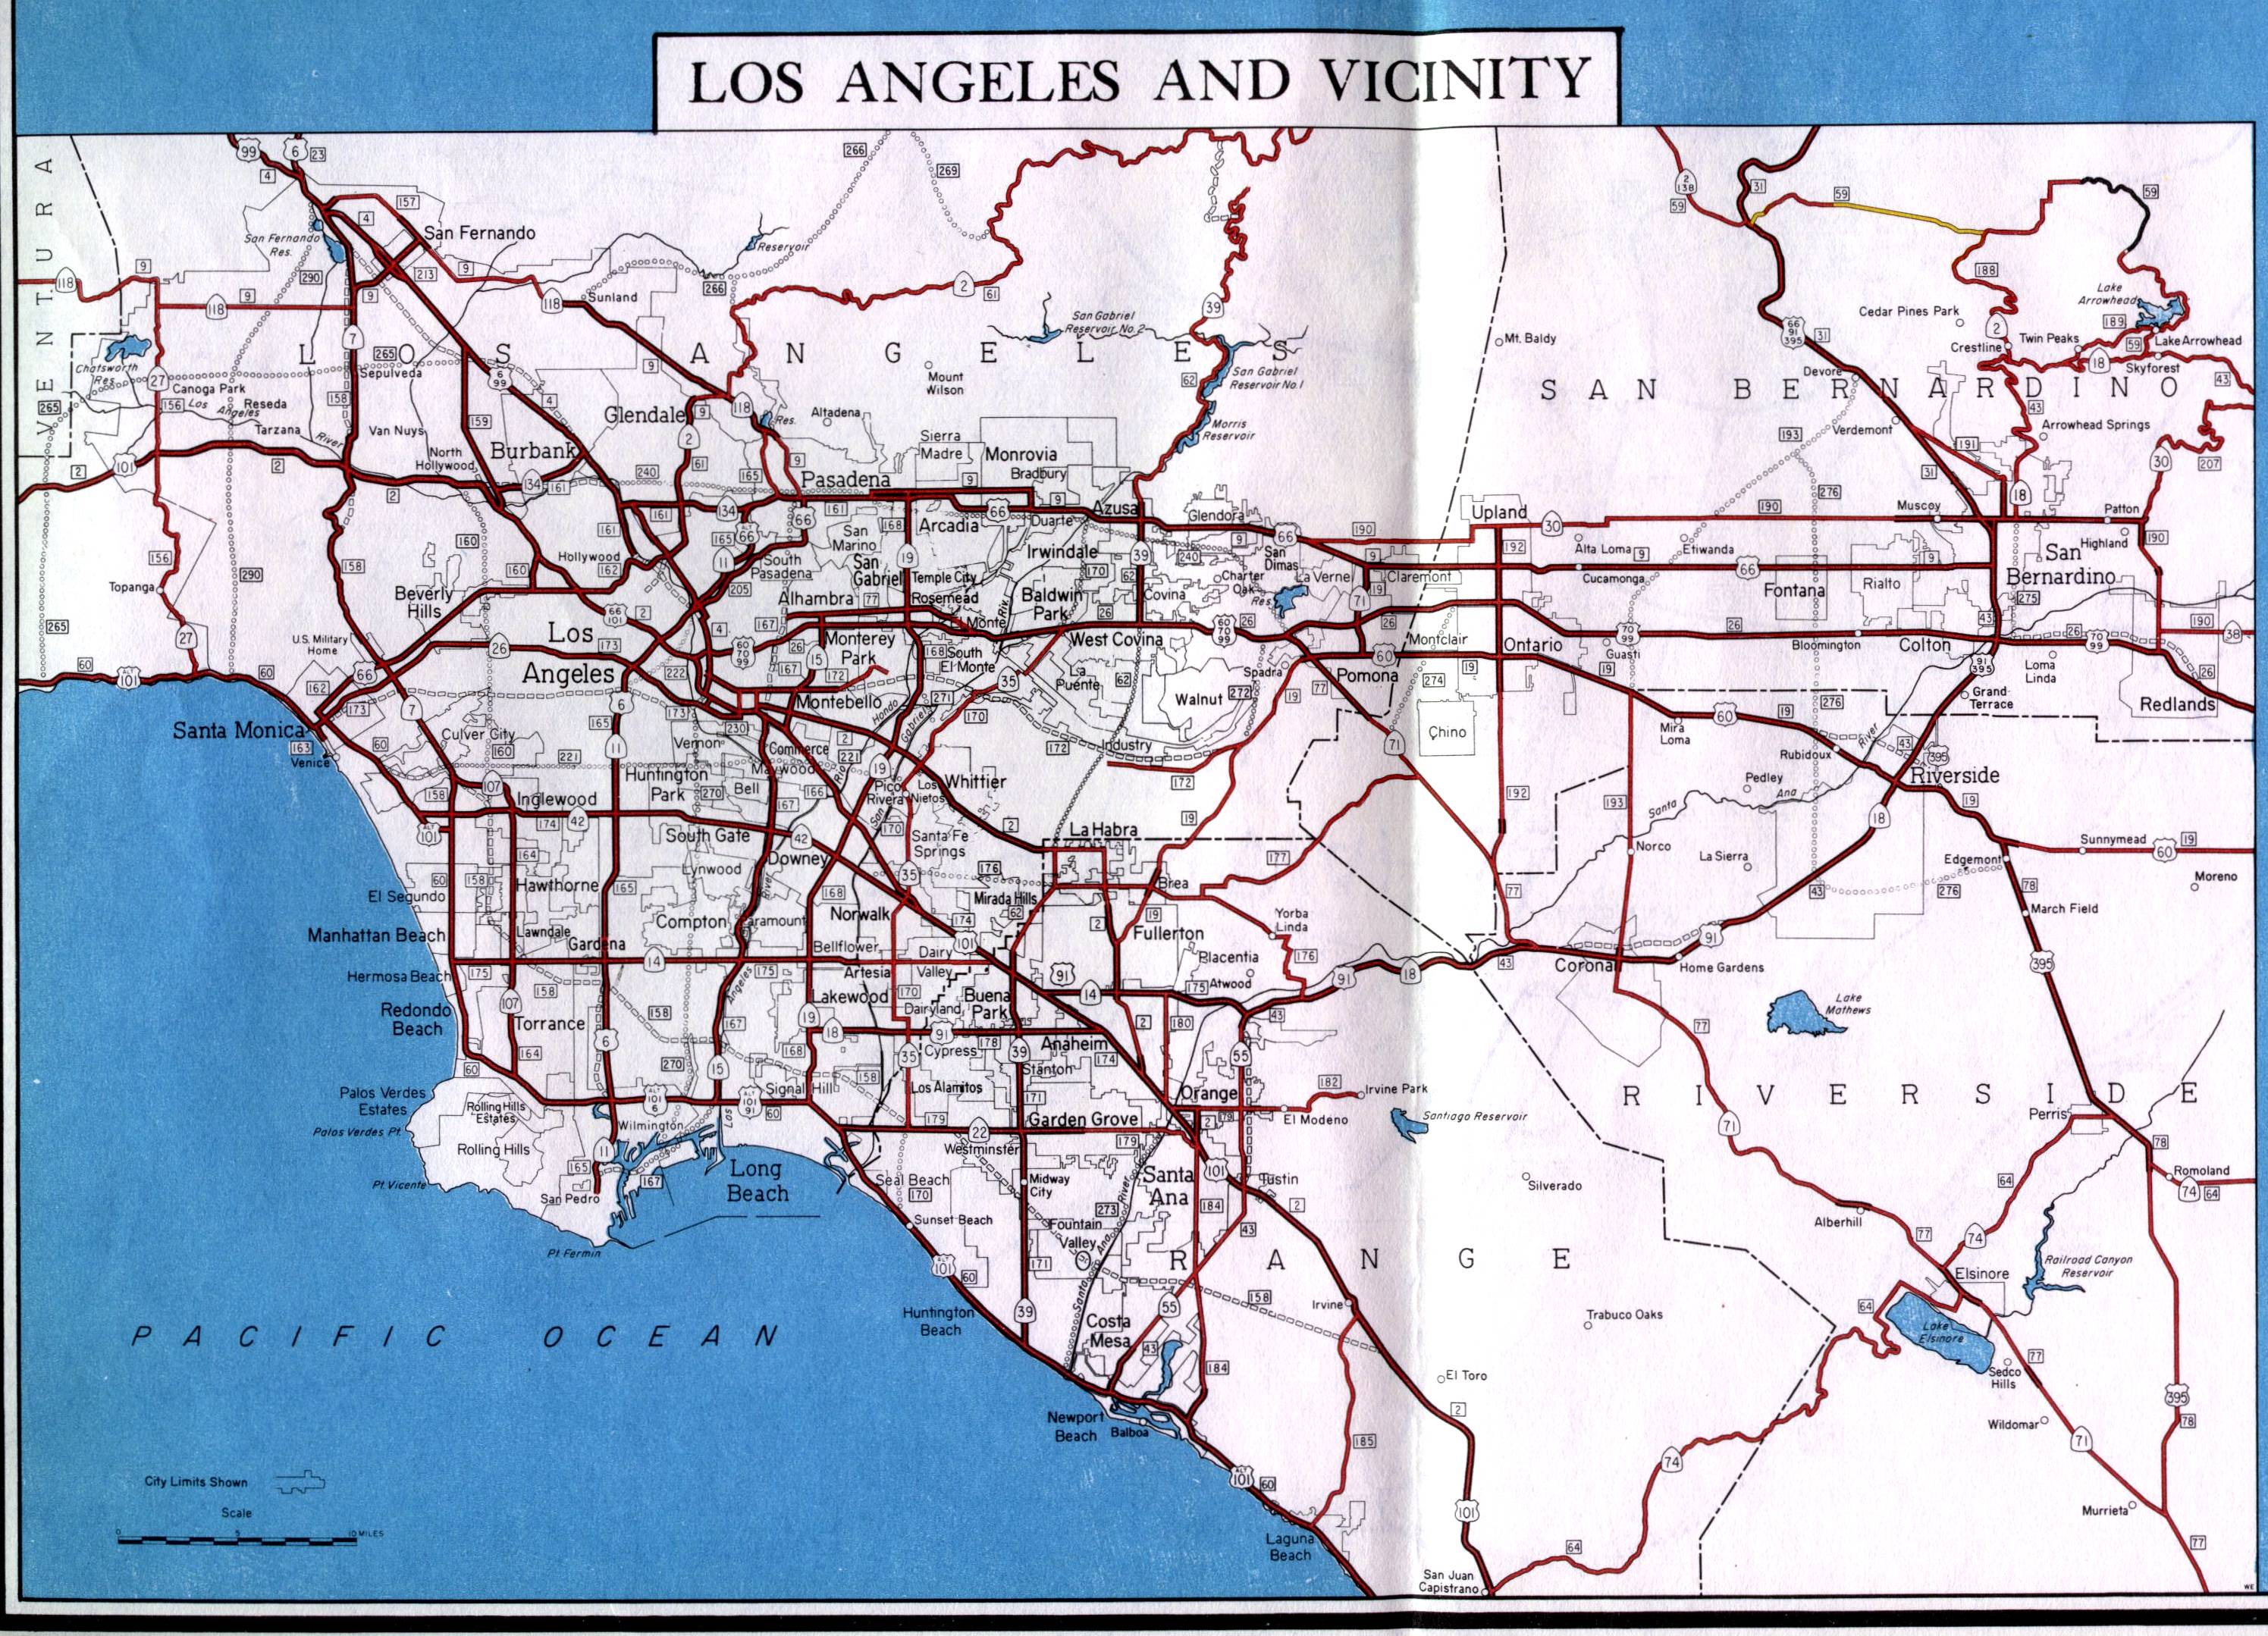 Los Angeles and vicinity on the 1936 California official highway map